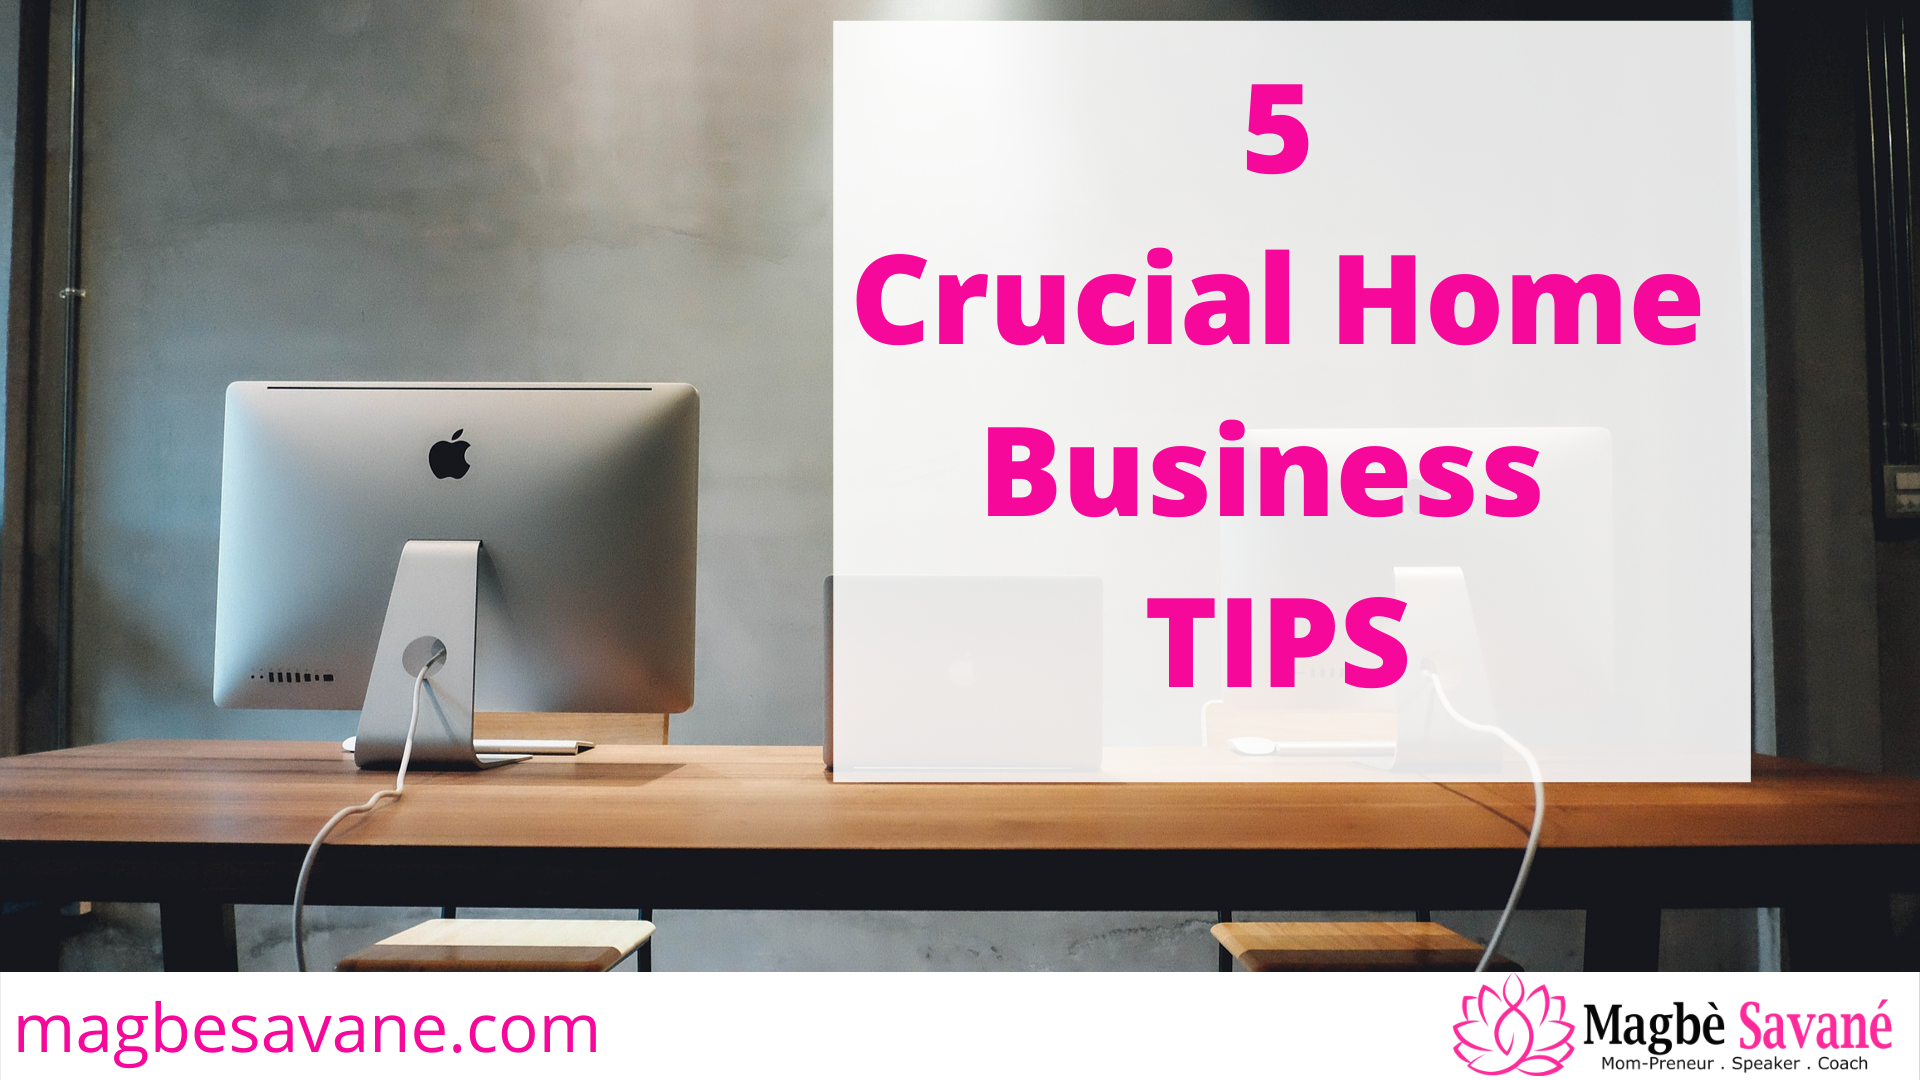 5 Crucial Home Business Tips to Realize Financial Freedom